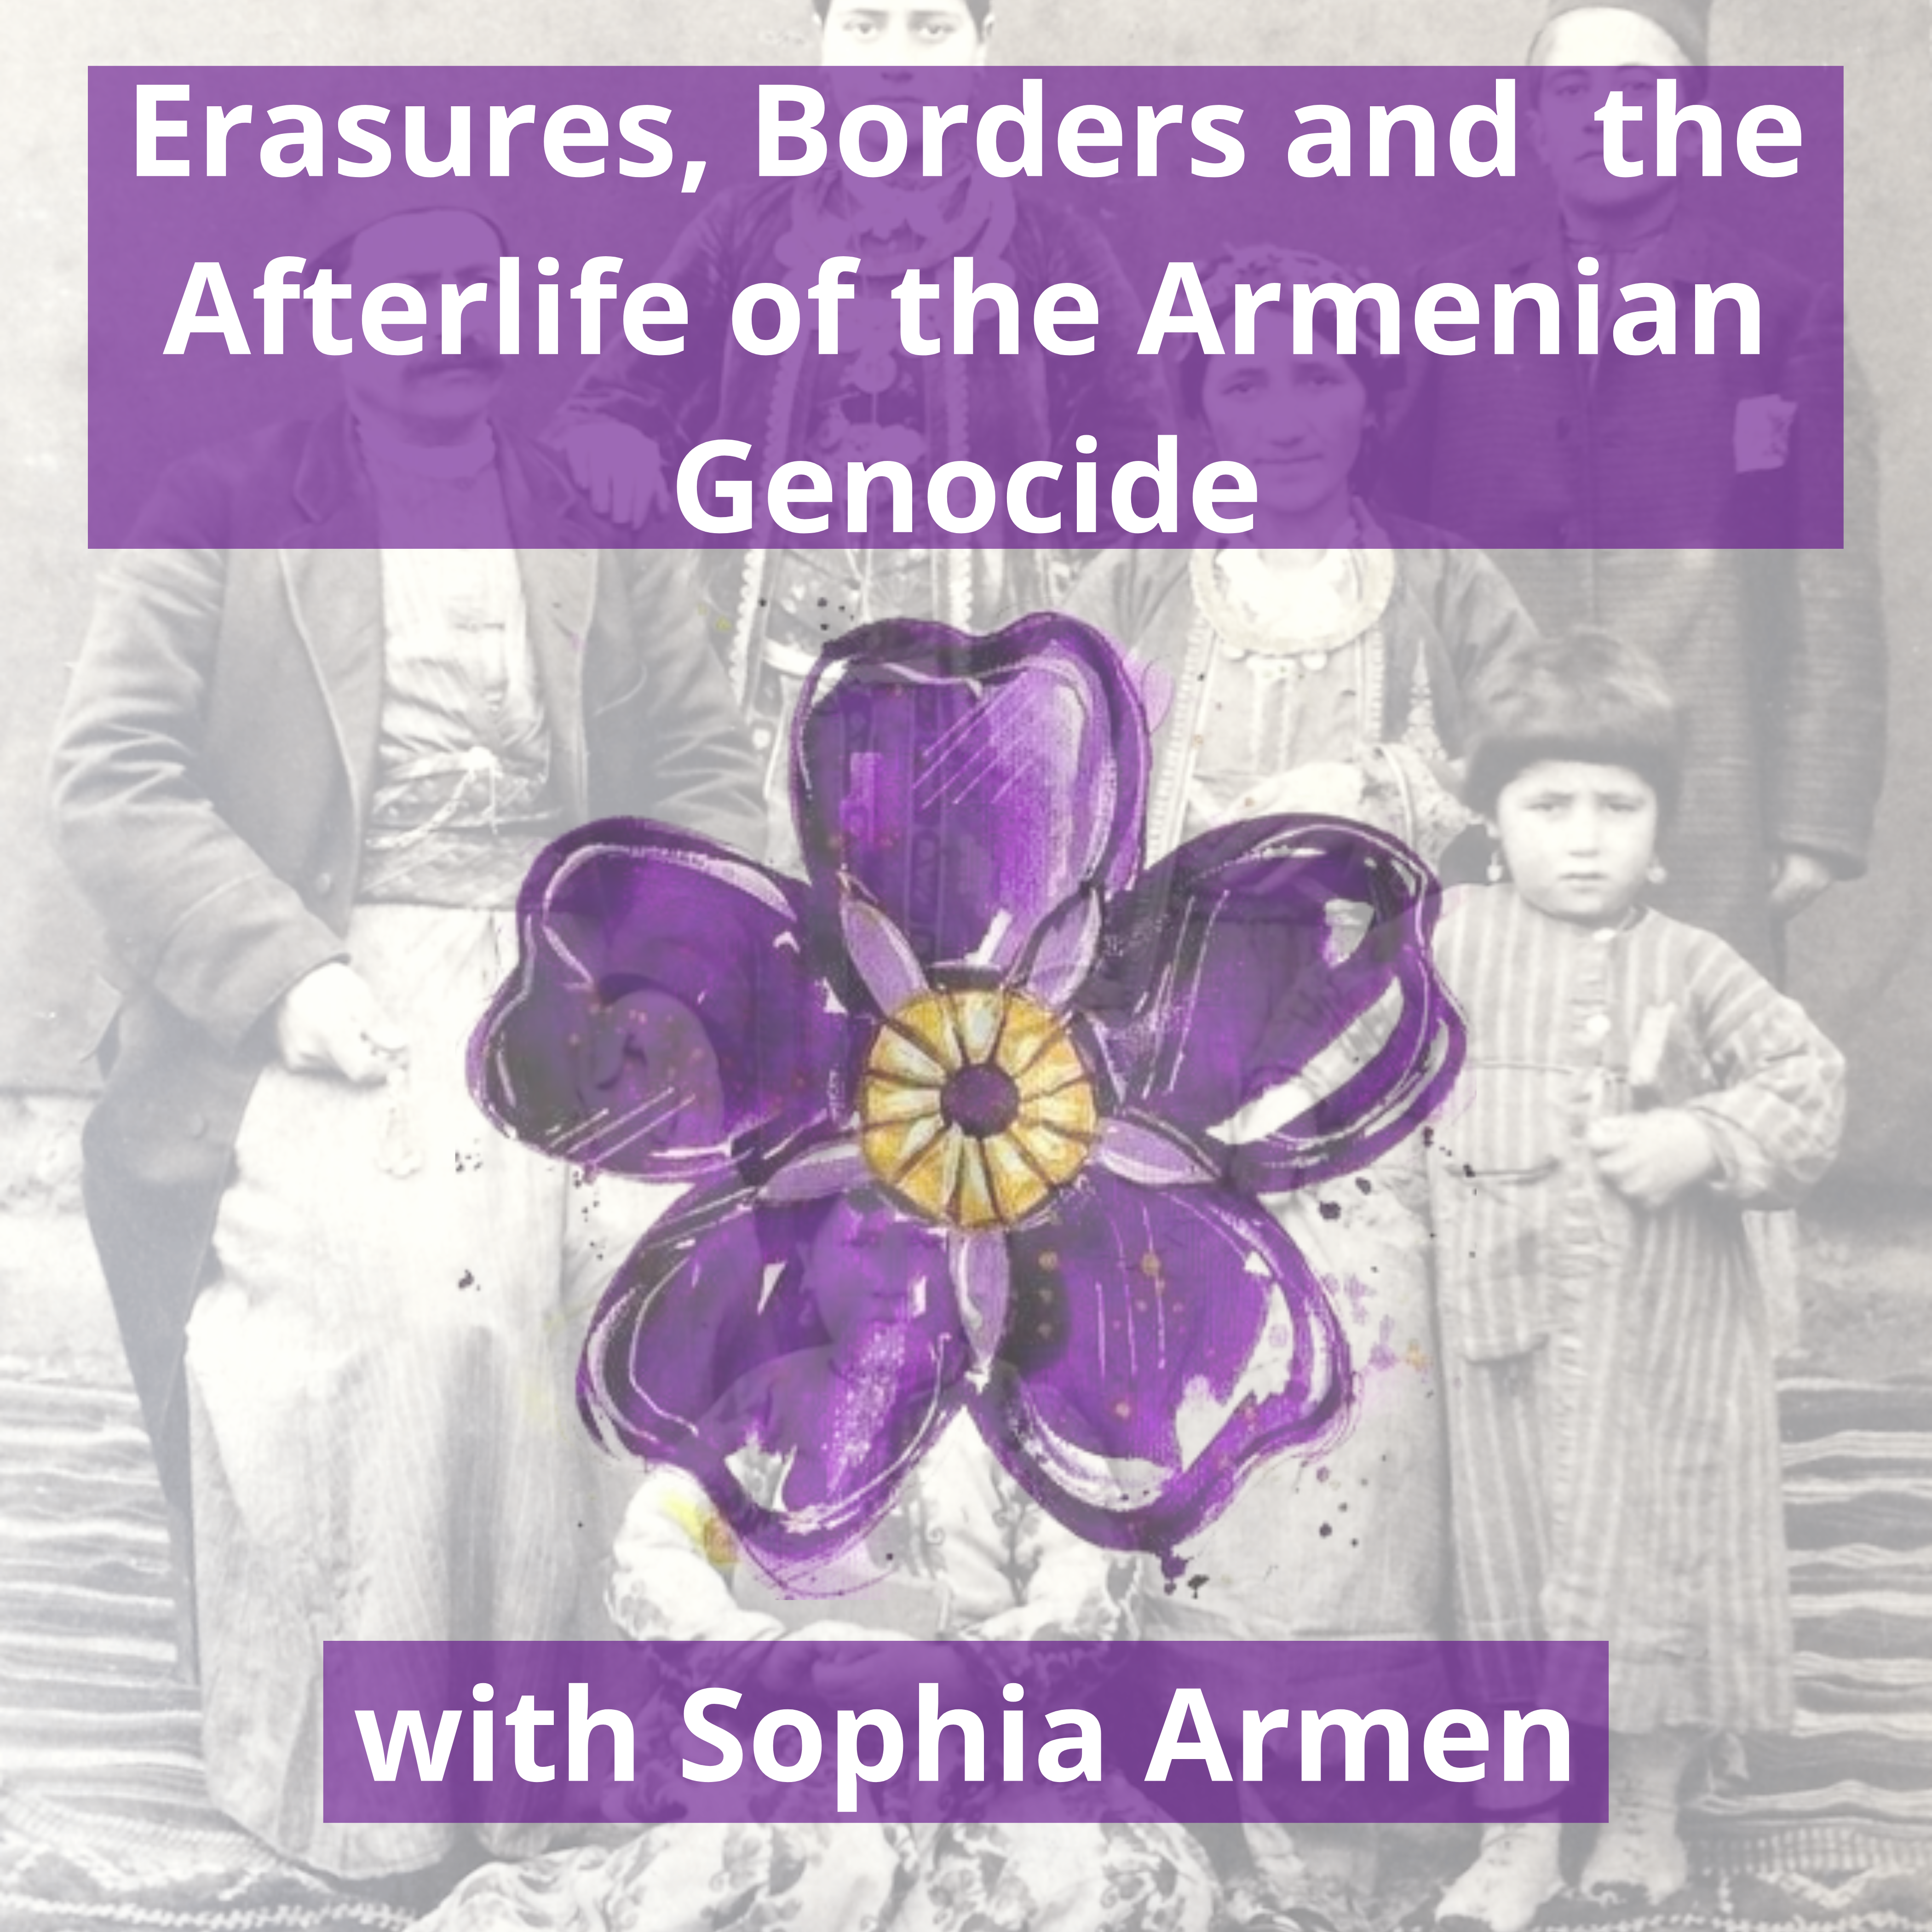 79/ Erasures, Borders and the Afterlife of the Armenian Genocide (with Sophia Armen)